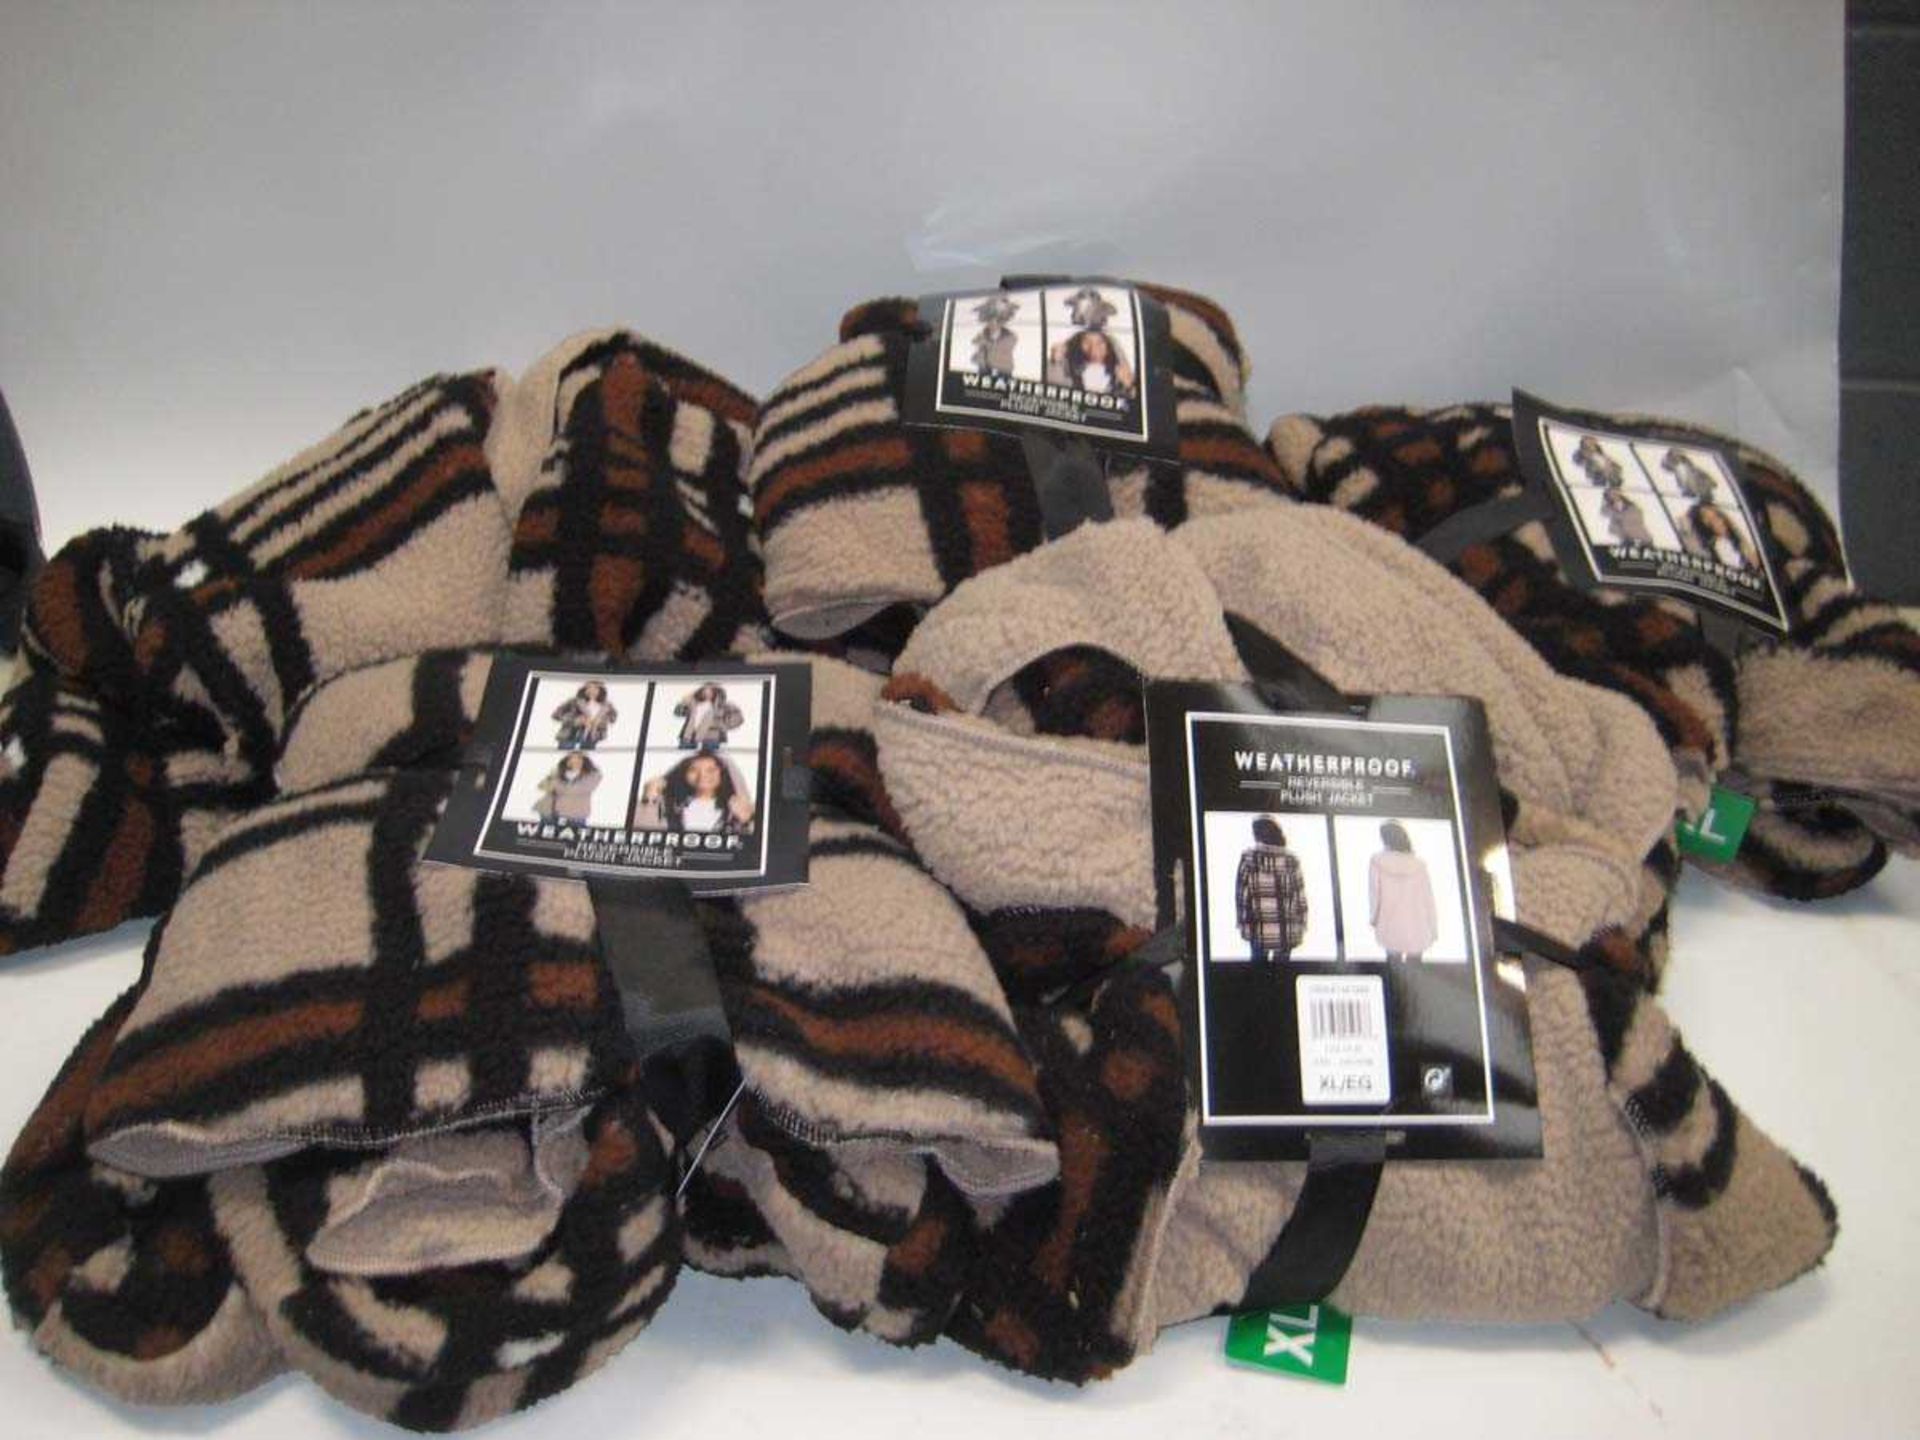 +VAT A bag containing 5x Weatherproof Reversible Plush Jackets in various sizes